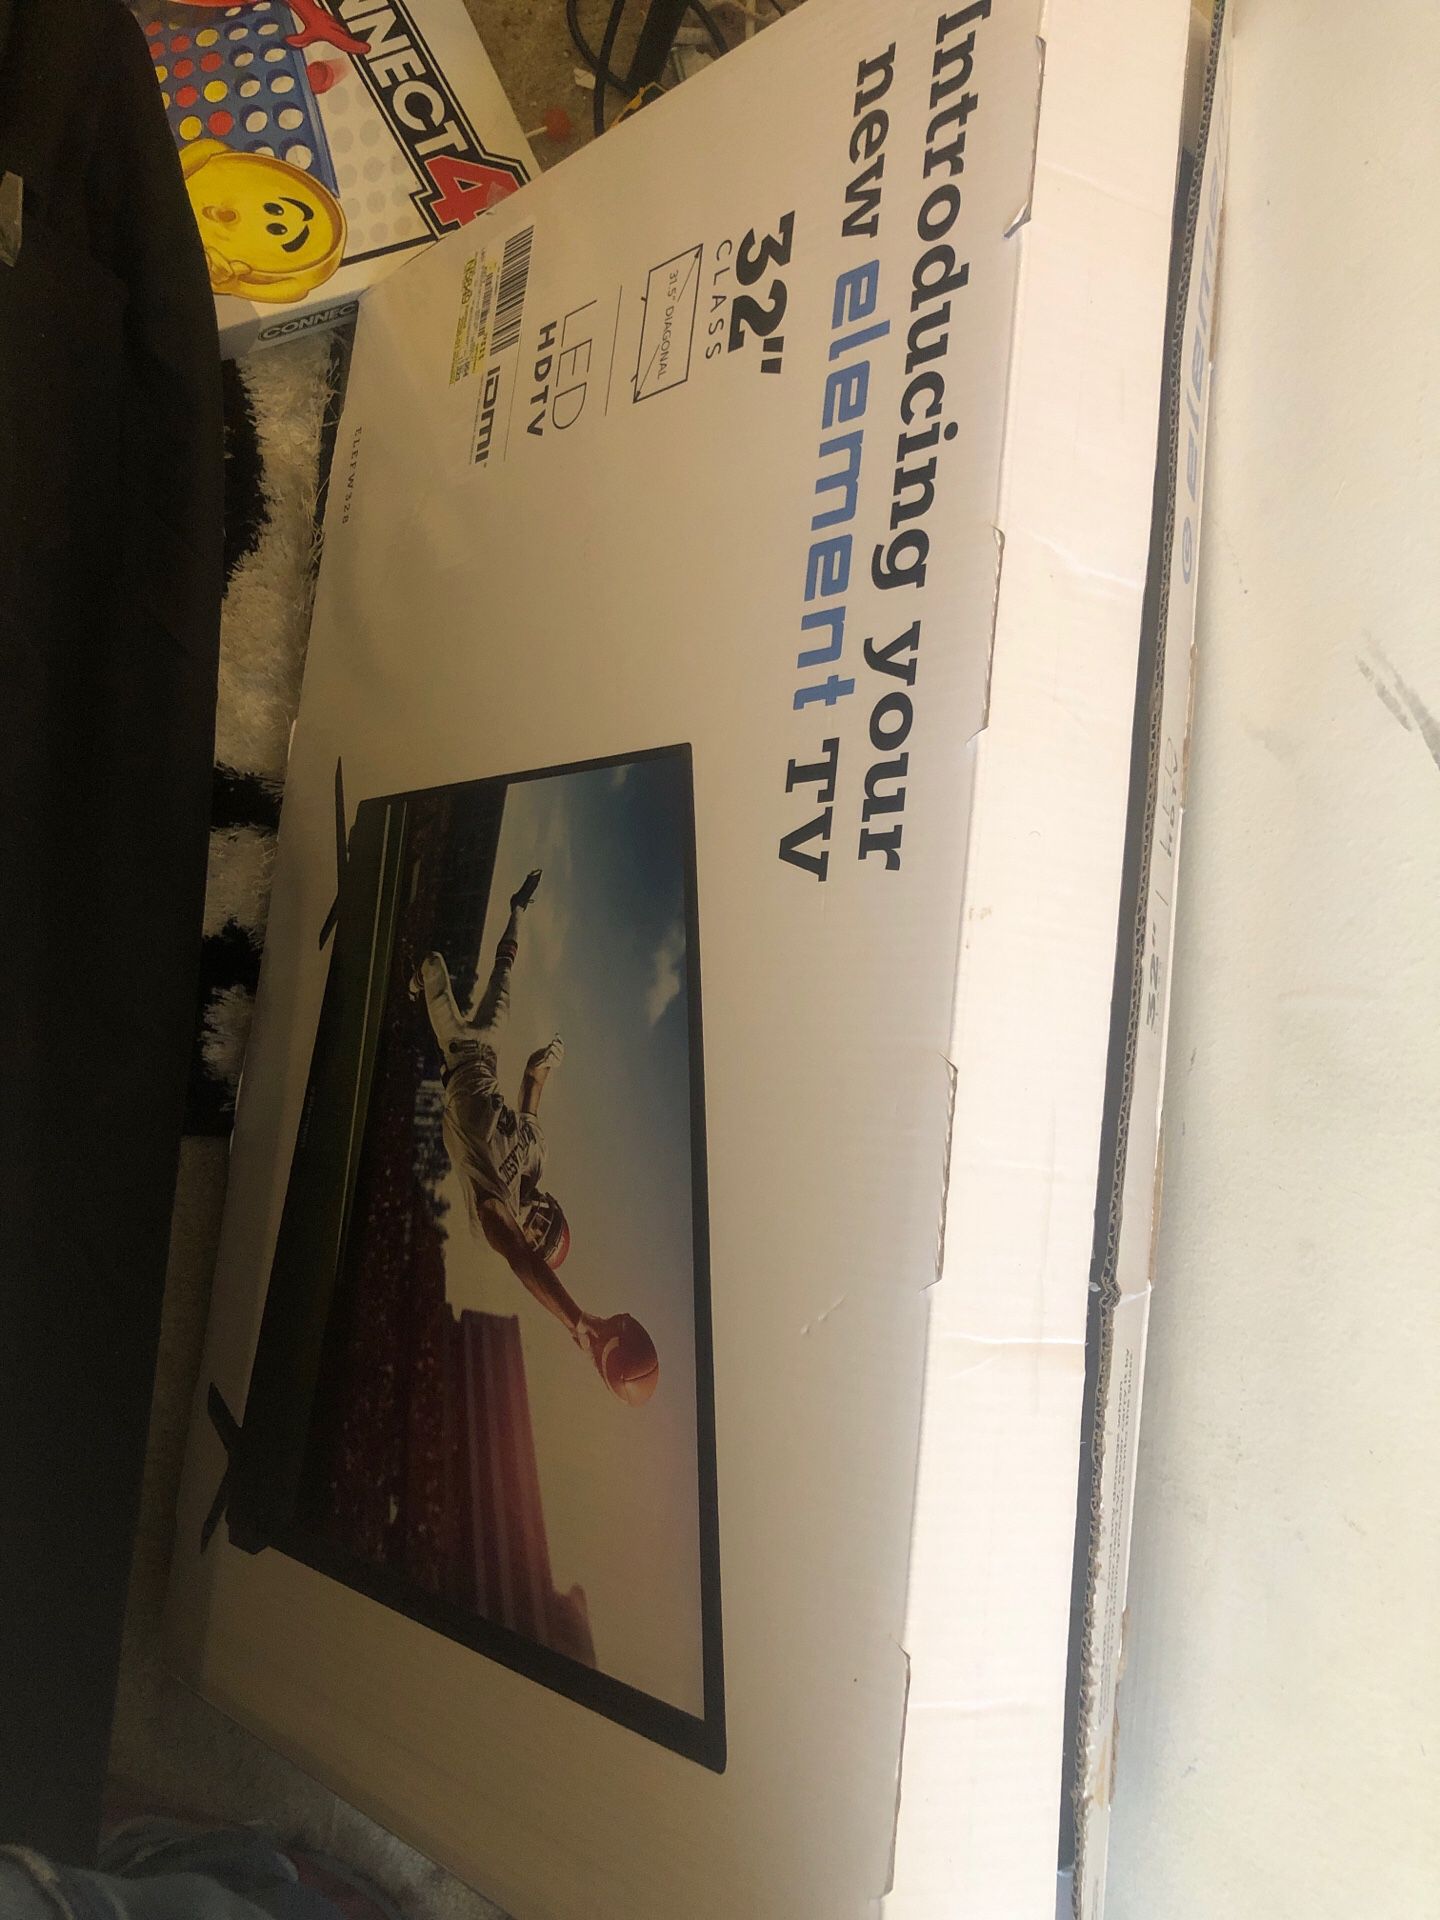 32” Element TV Brand new never used